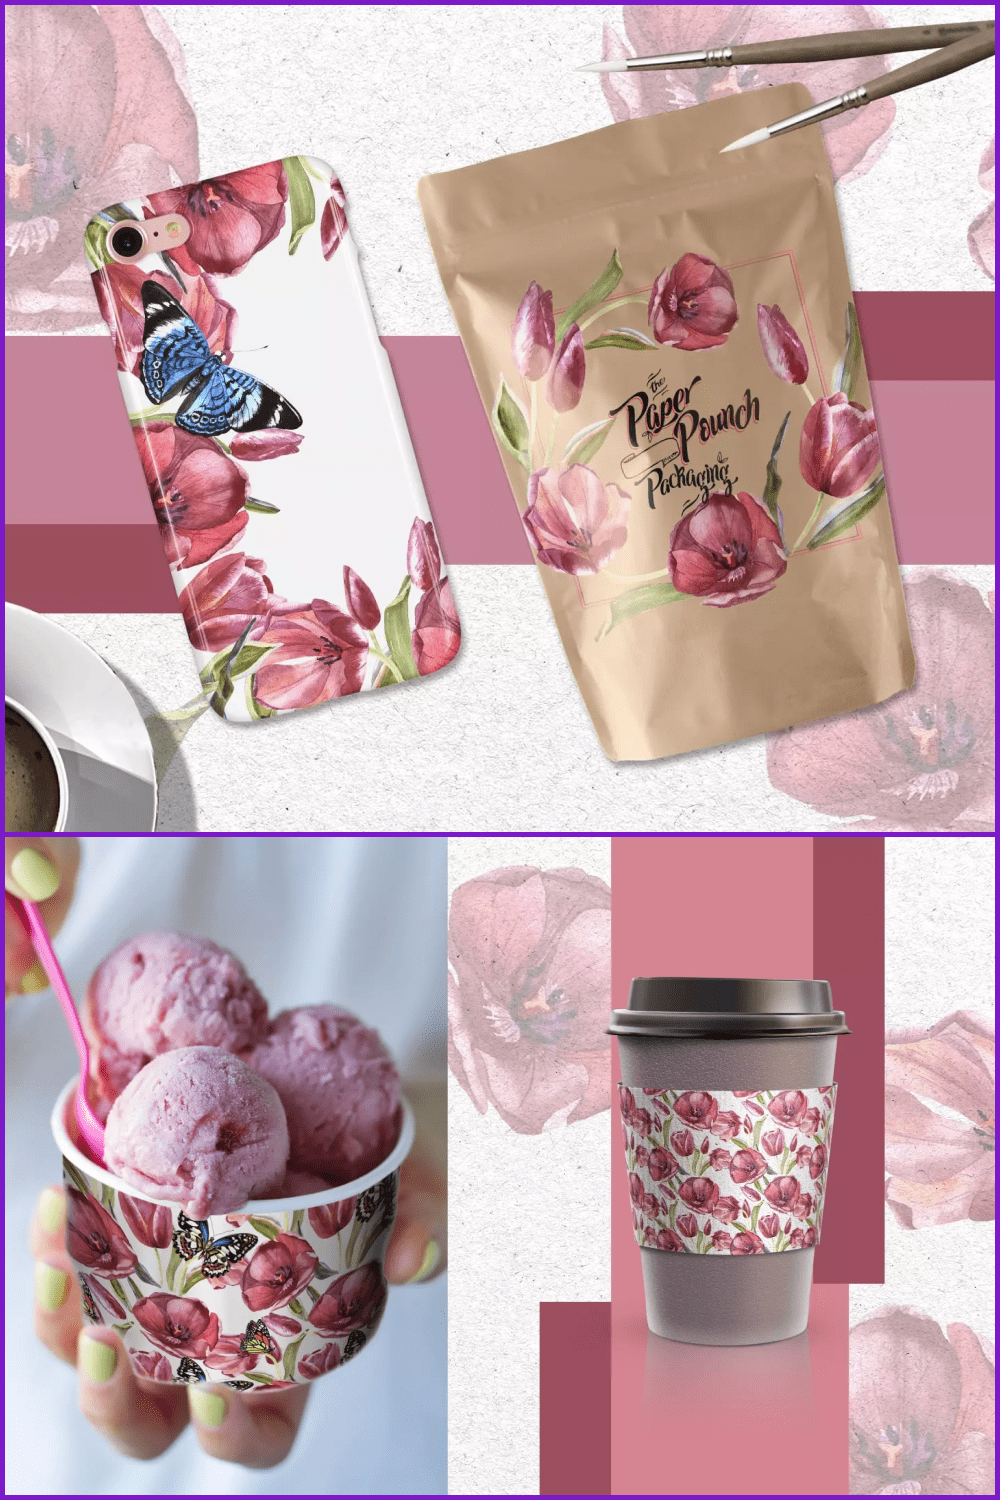 Tulip patterns on a phone case, package, ice-cream and coffee cup.